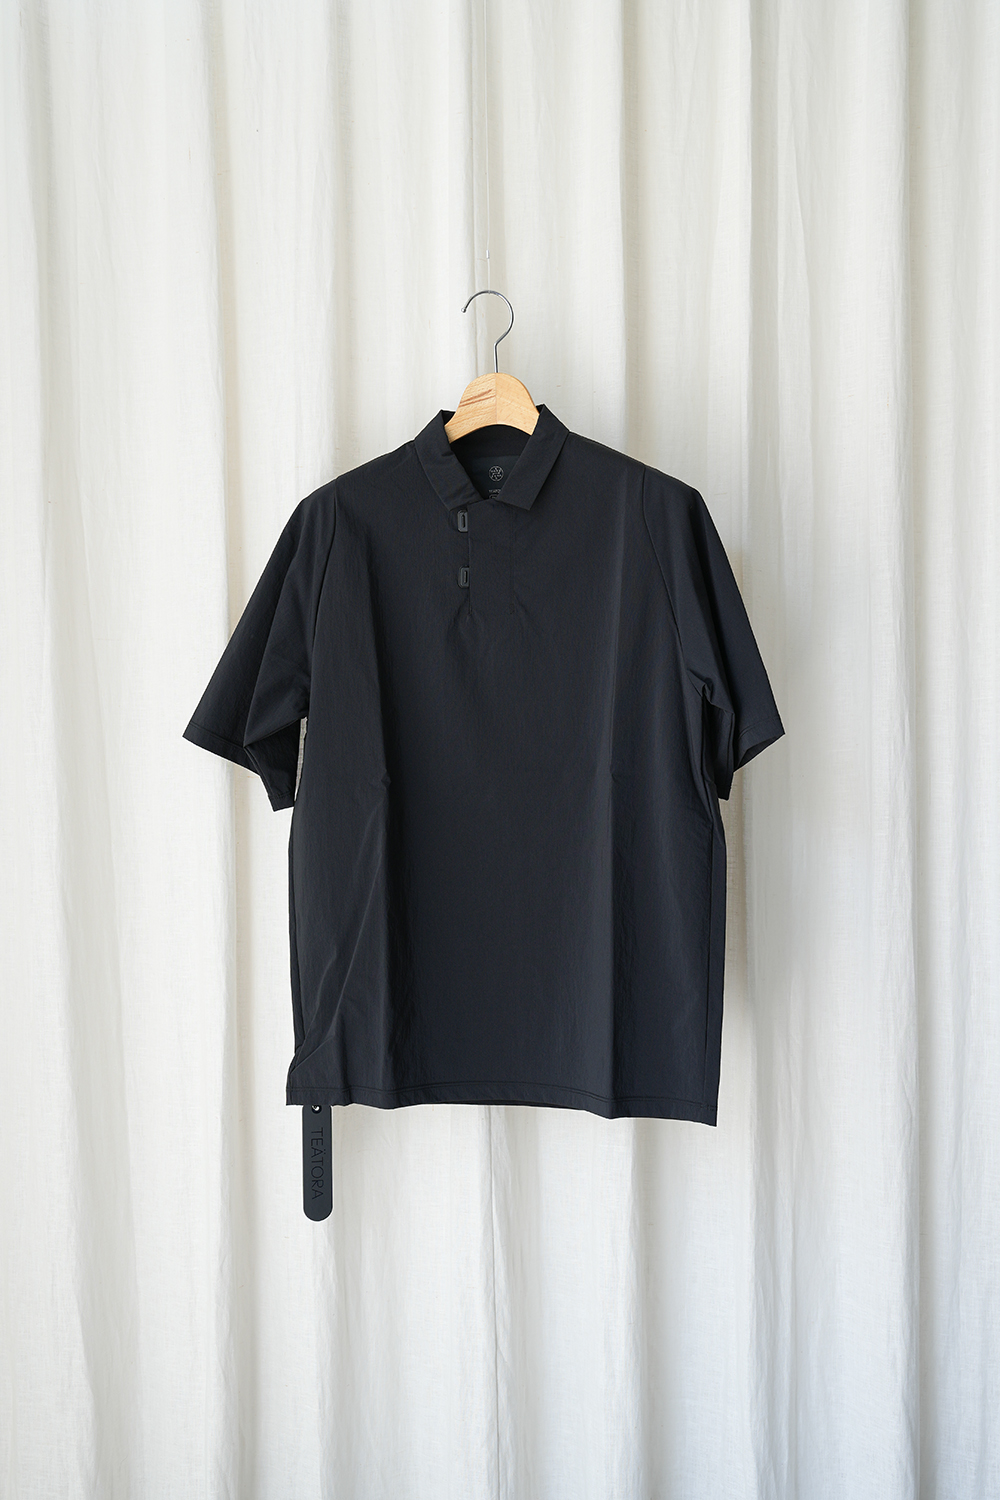 CAPSULESNAP POLO SHIRT DOCTOROID | ANOTHER LOUNGE